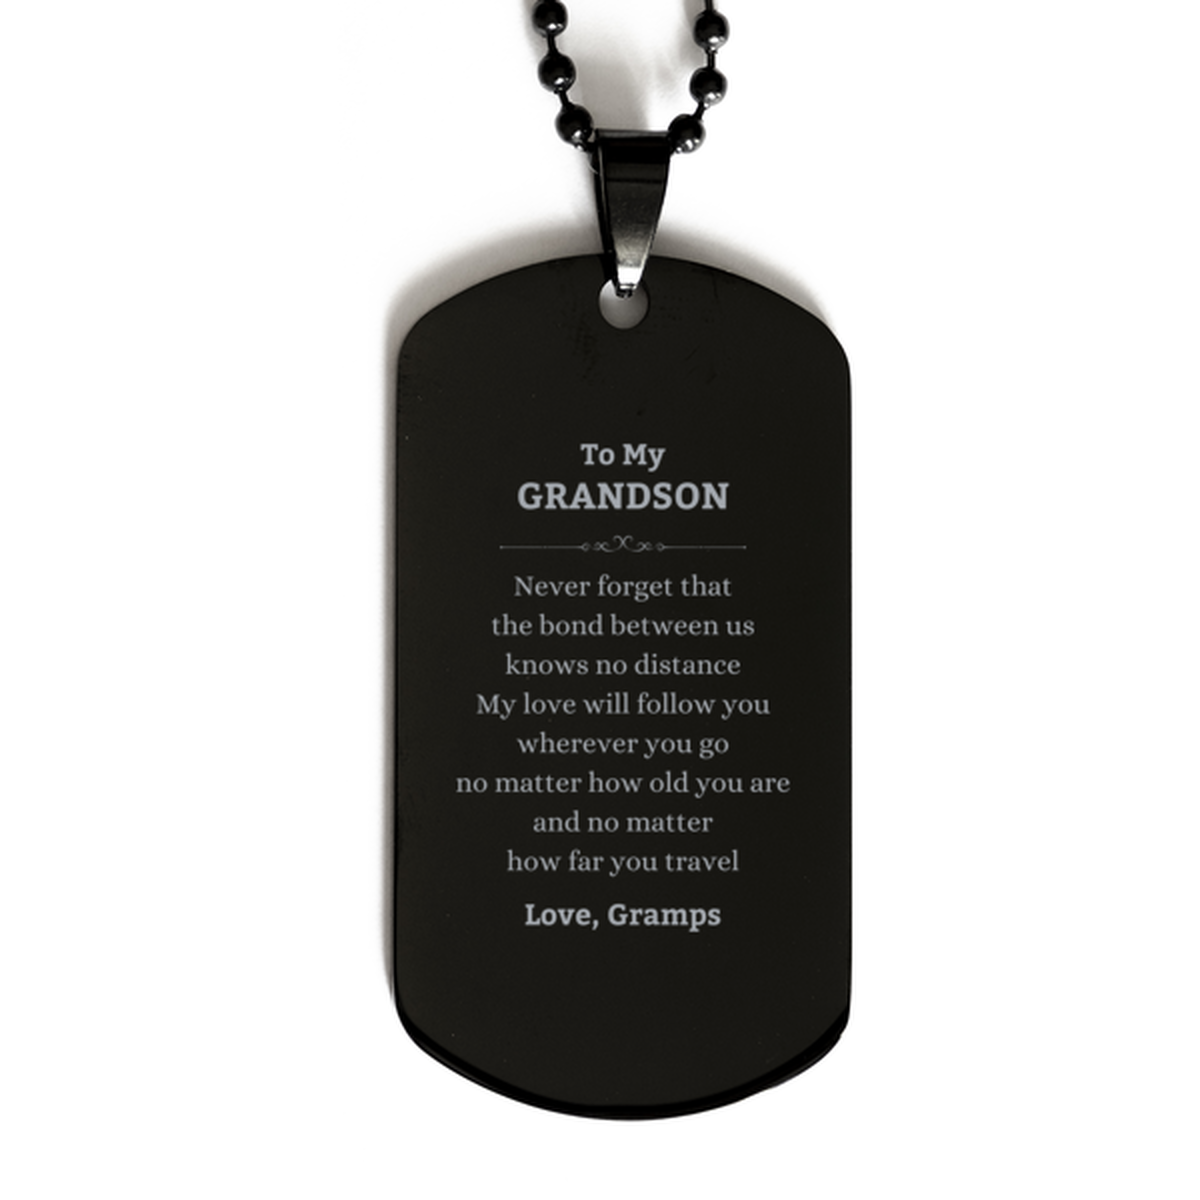 Grandson Birthday Gifts from Gramps, Adjustable Black Dog Tag for Grandson Christmas Graduation Unique Gifts Grandson Never forget that the bond between us knows no distance. Love, Gramps